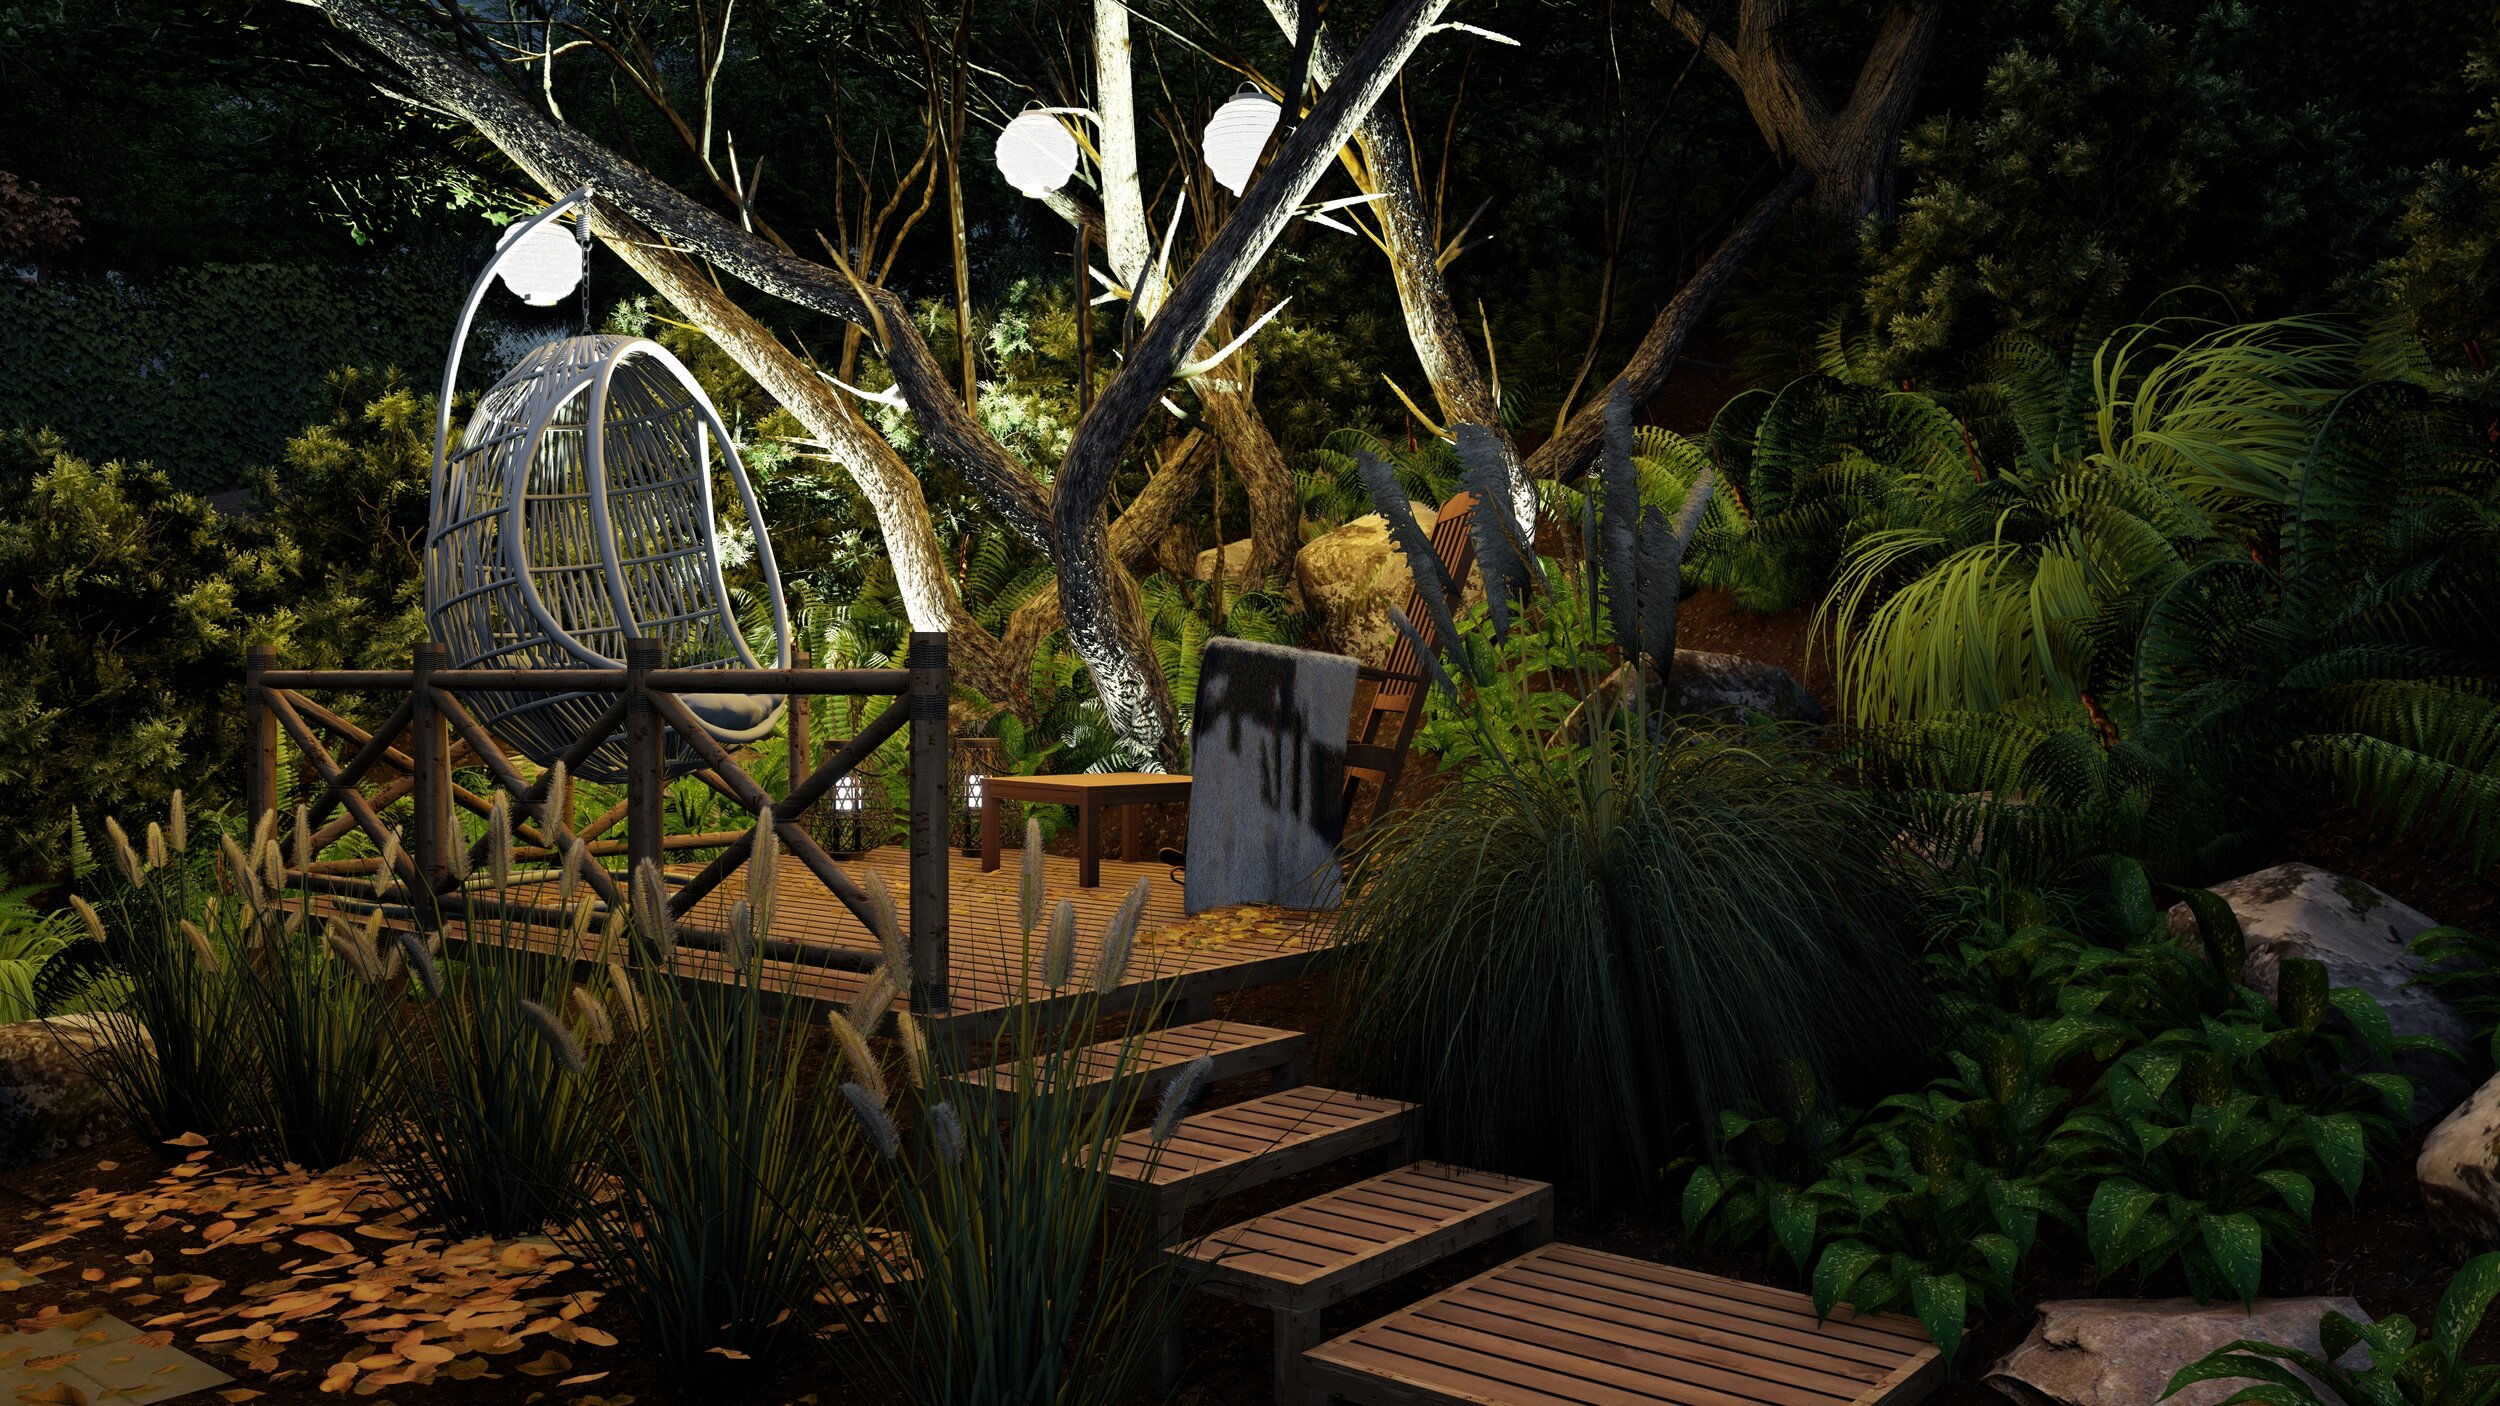 Night view of lush backyard with dense plantings around raised deck with hanging chair